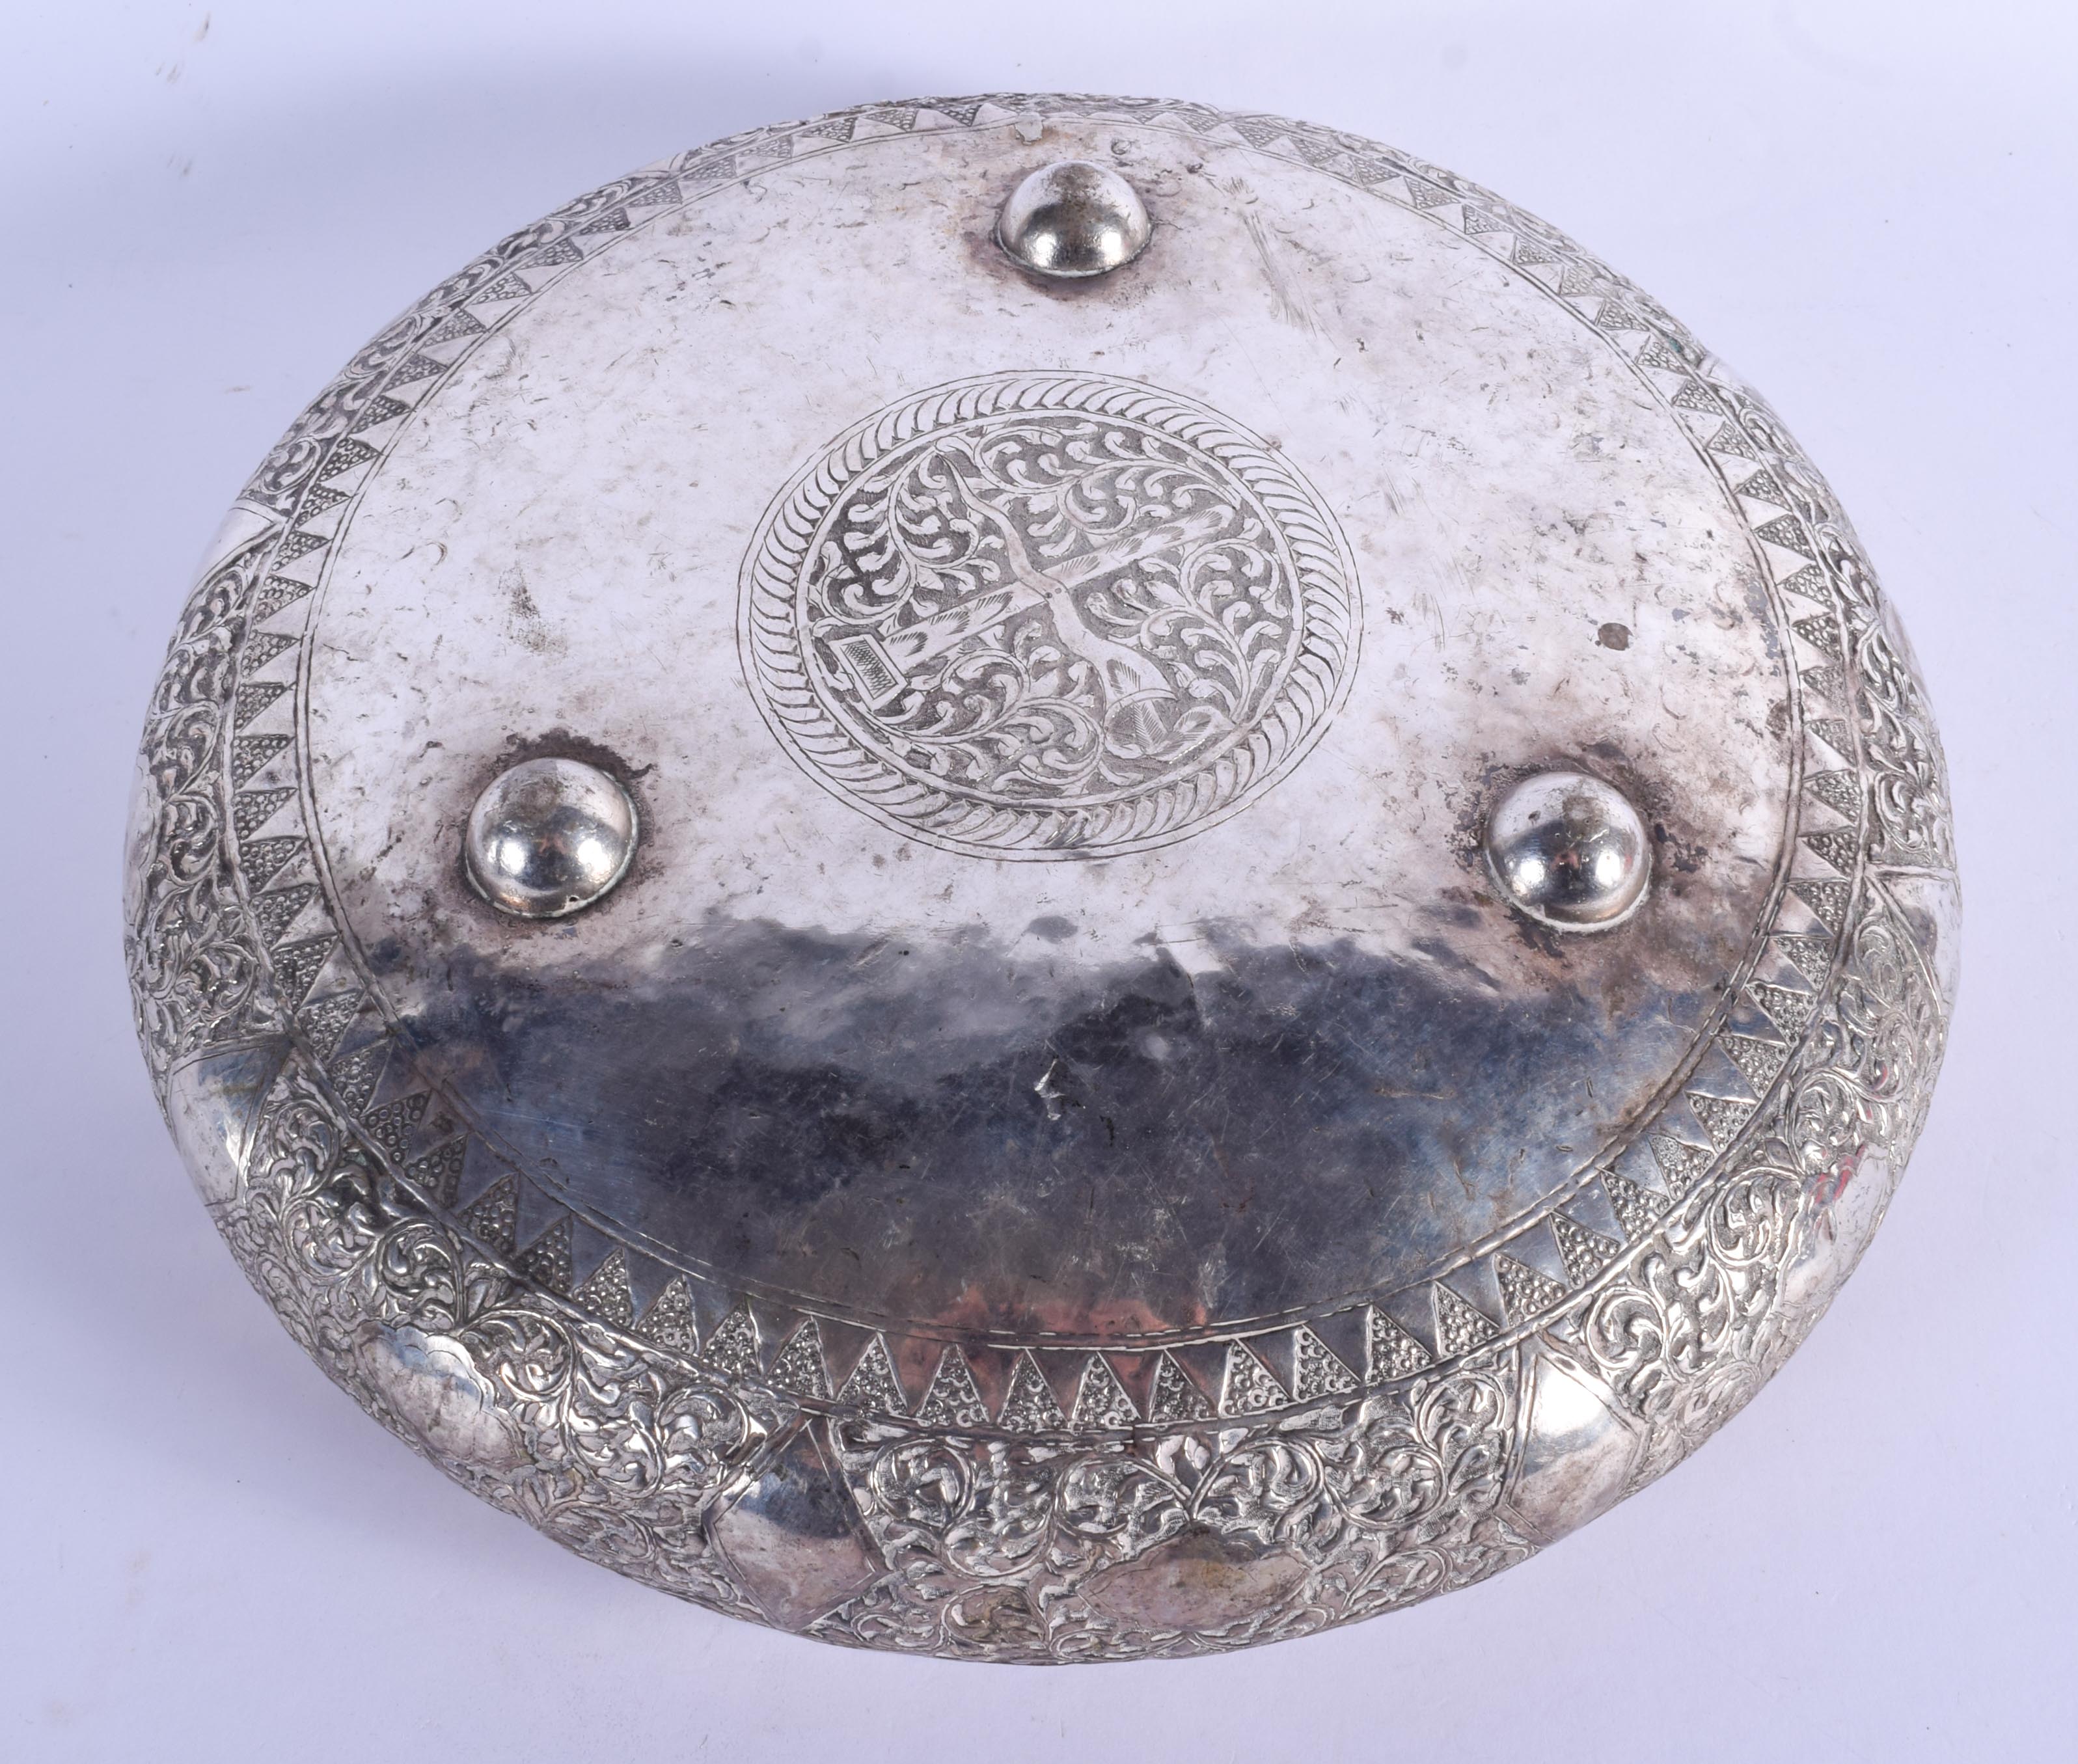 A 19TH CENTURY MIDDLE EASTERN ISLAMIC SILVER BOWL. 320 grams. 25 cm diameter. - Image 4 of 4